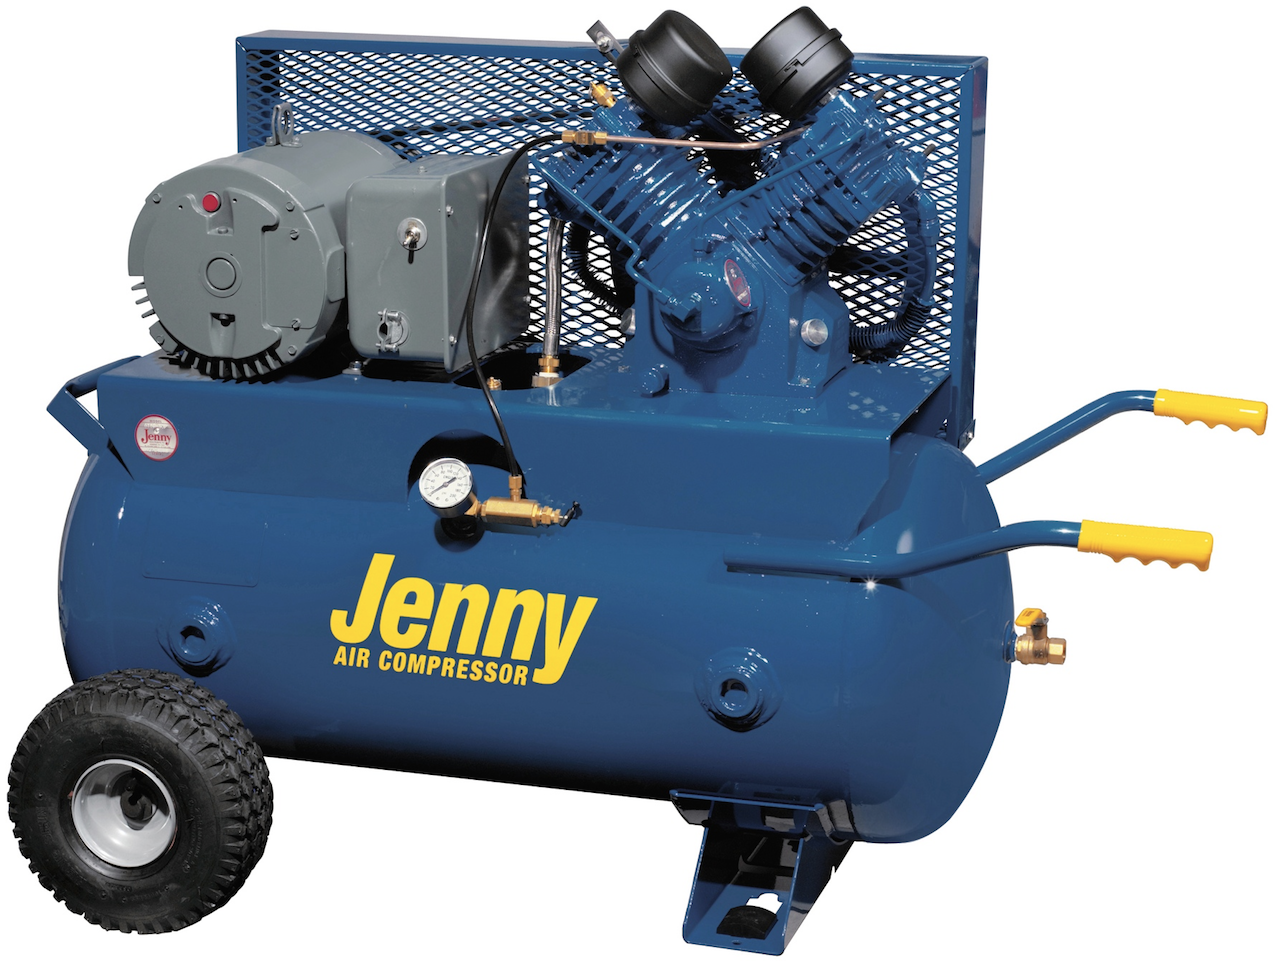 Jenny Products, Inc. is proud to announce that it has achieved the “UL Listed” designation from Underwriter Laboratories (UL) on the company’s full line of electric motor piston air compressors.